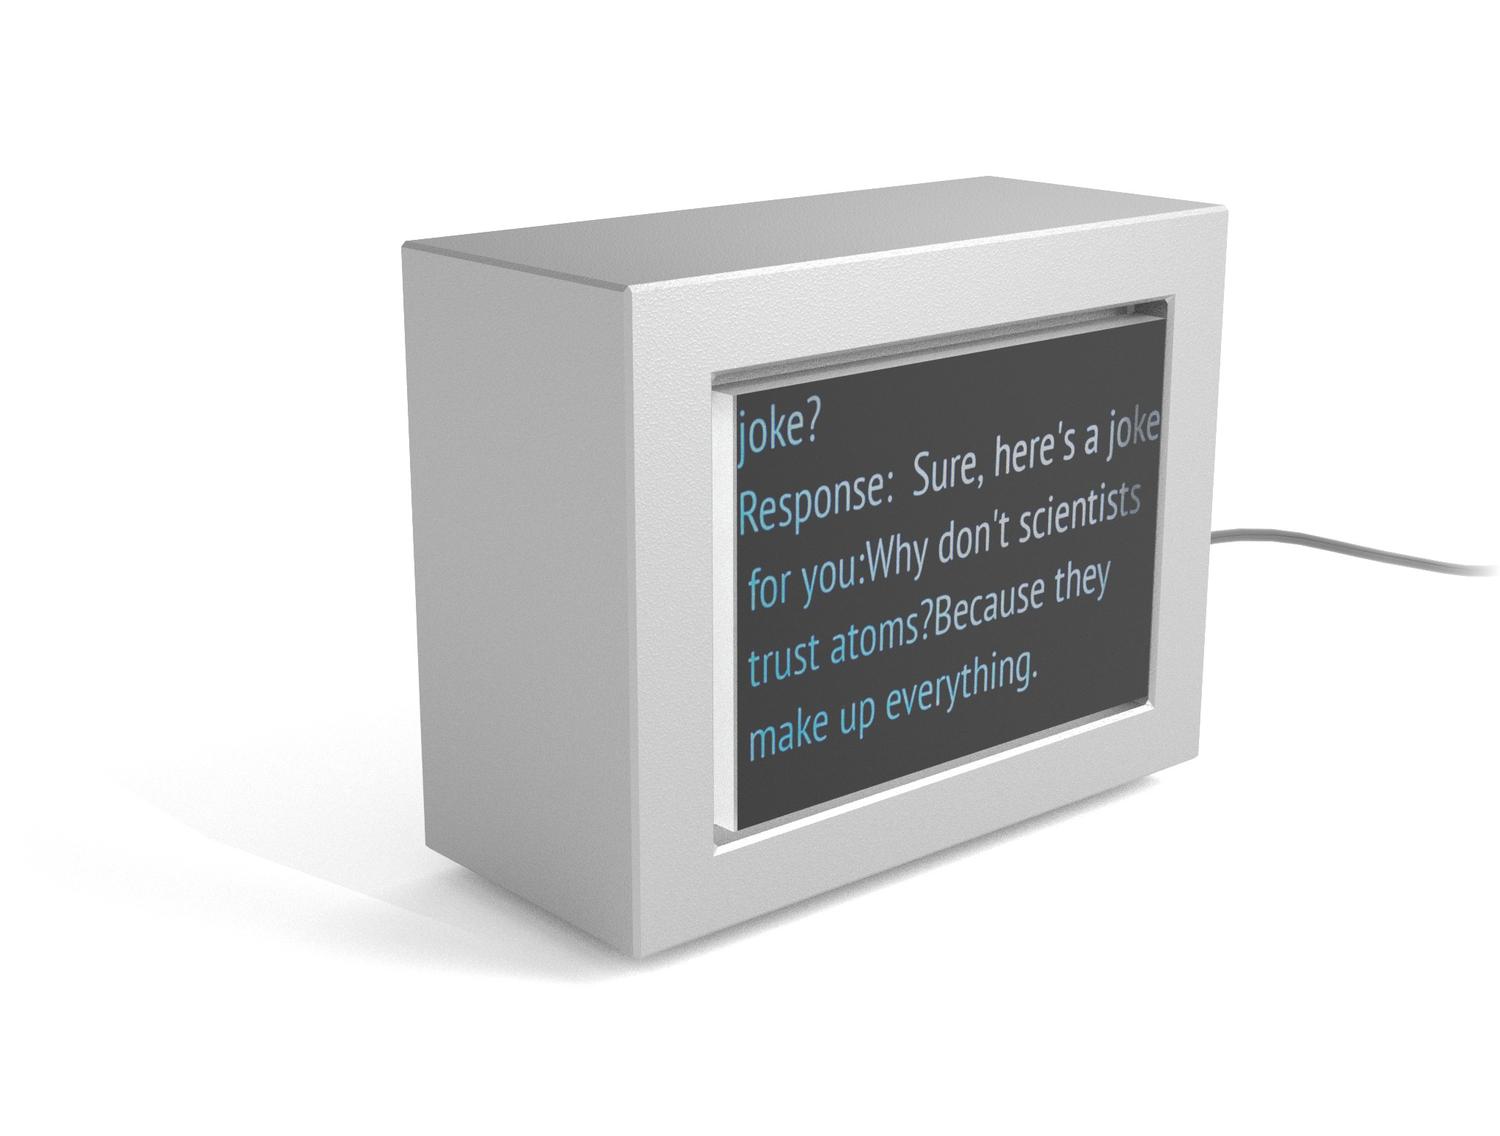 Your very own private AI that you can ask questions and get answers, all in a tiny box! The first AI that you can talk to, and that talks back, runnin